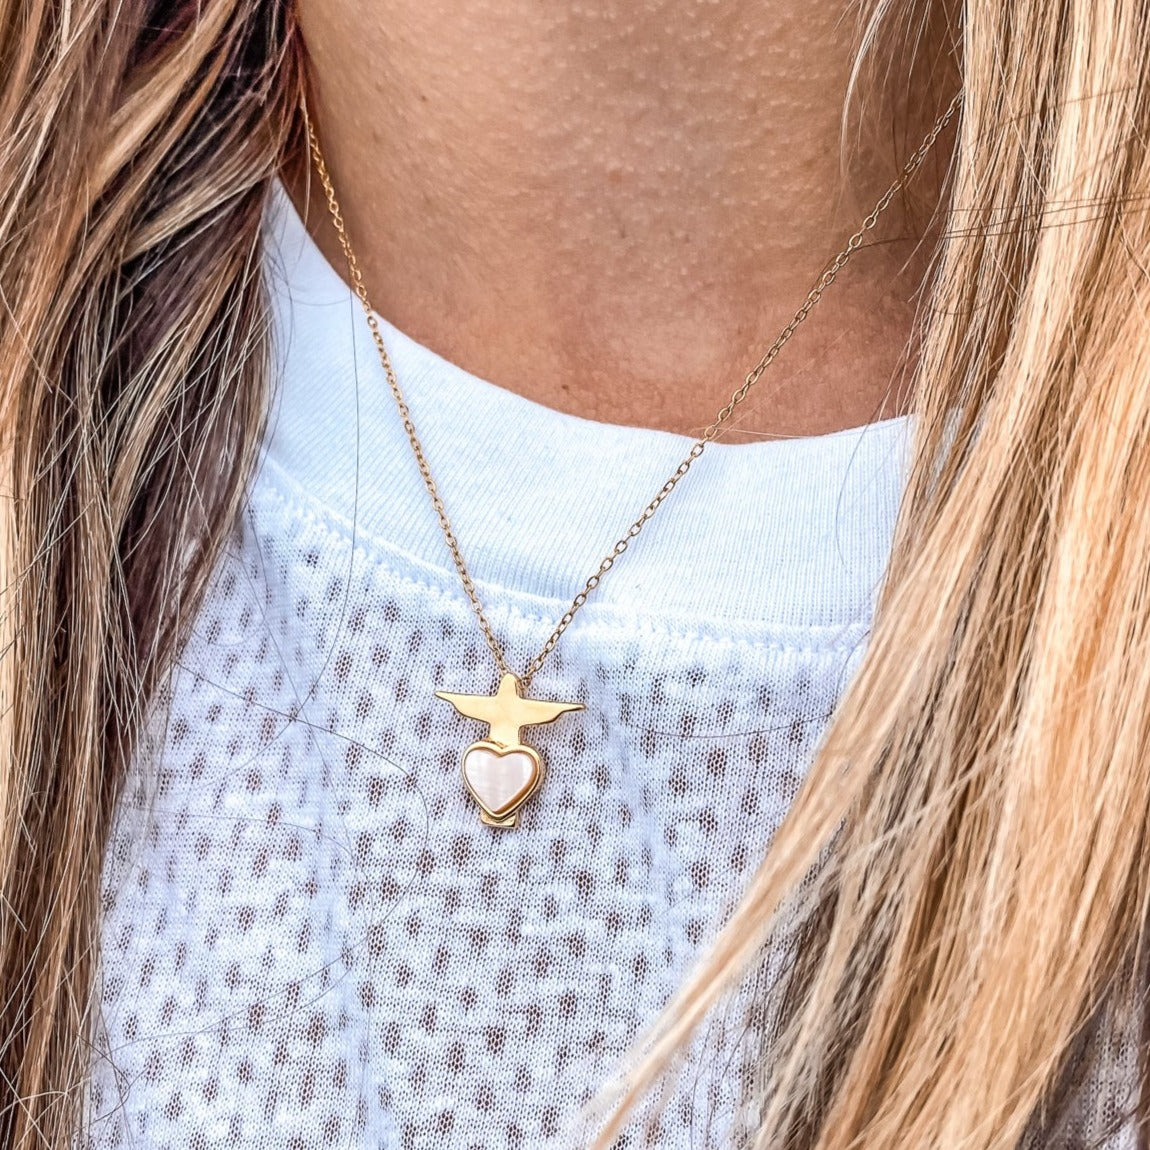 Christ the Redeemer Pendant Necklace in yellow gold plated with a heart shaped mother of pearl made by Born to Rock Jewelry